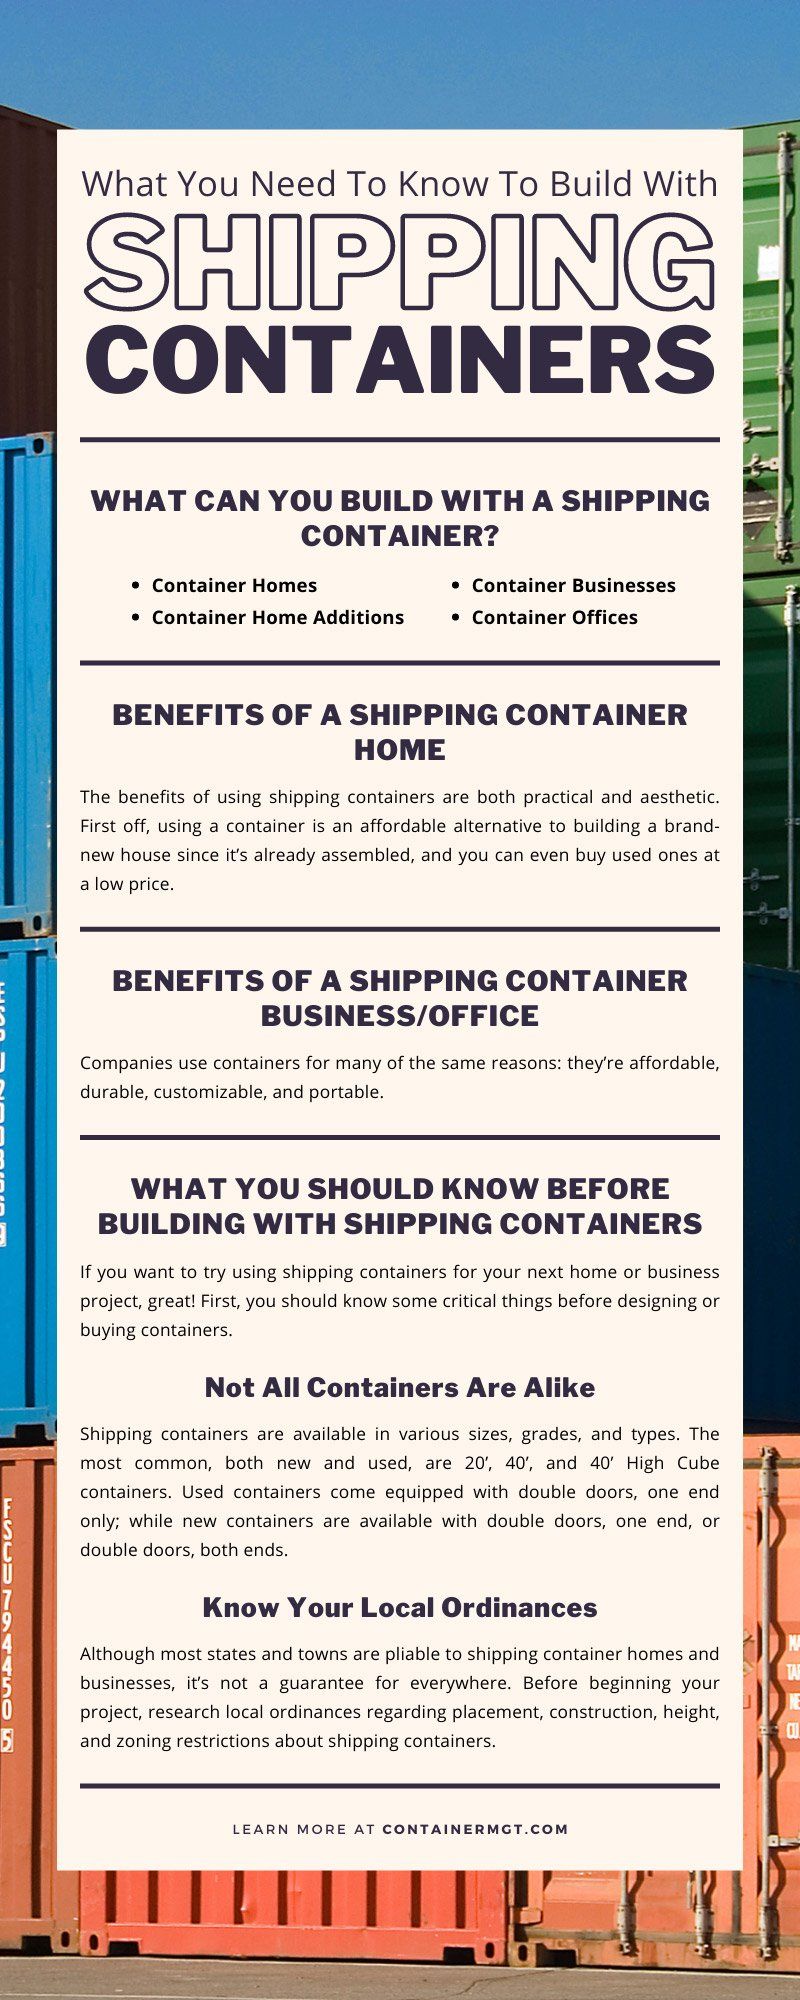 What You Need To Know To Build With Shipping Containers